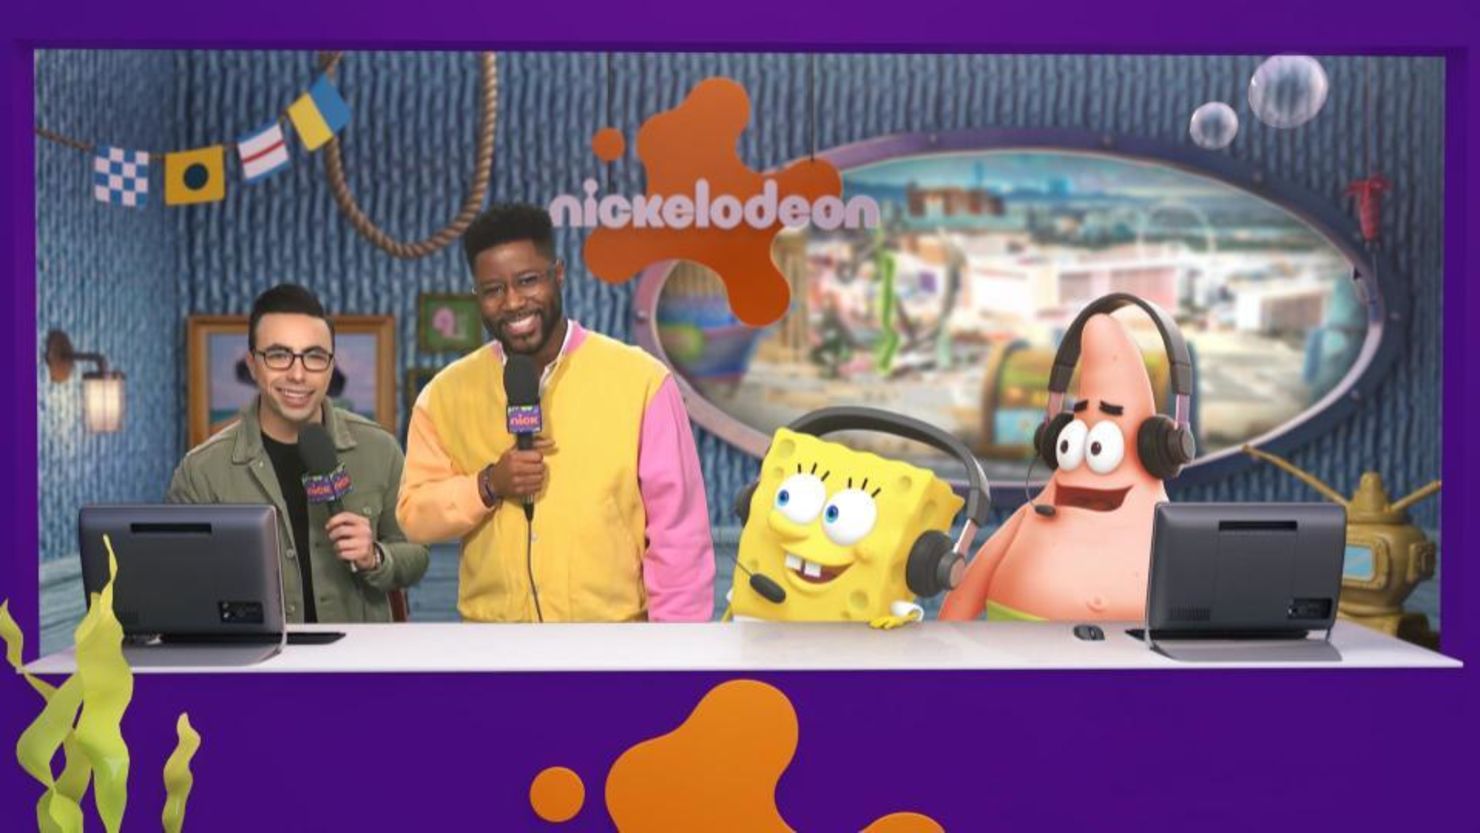 SpongeBob SquarePants is going to announce this Super Bowl broadcast